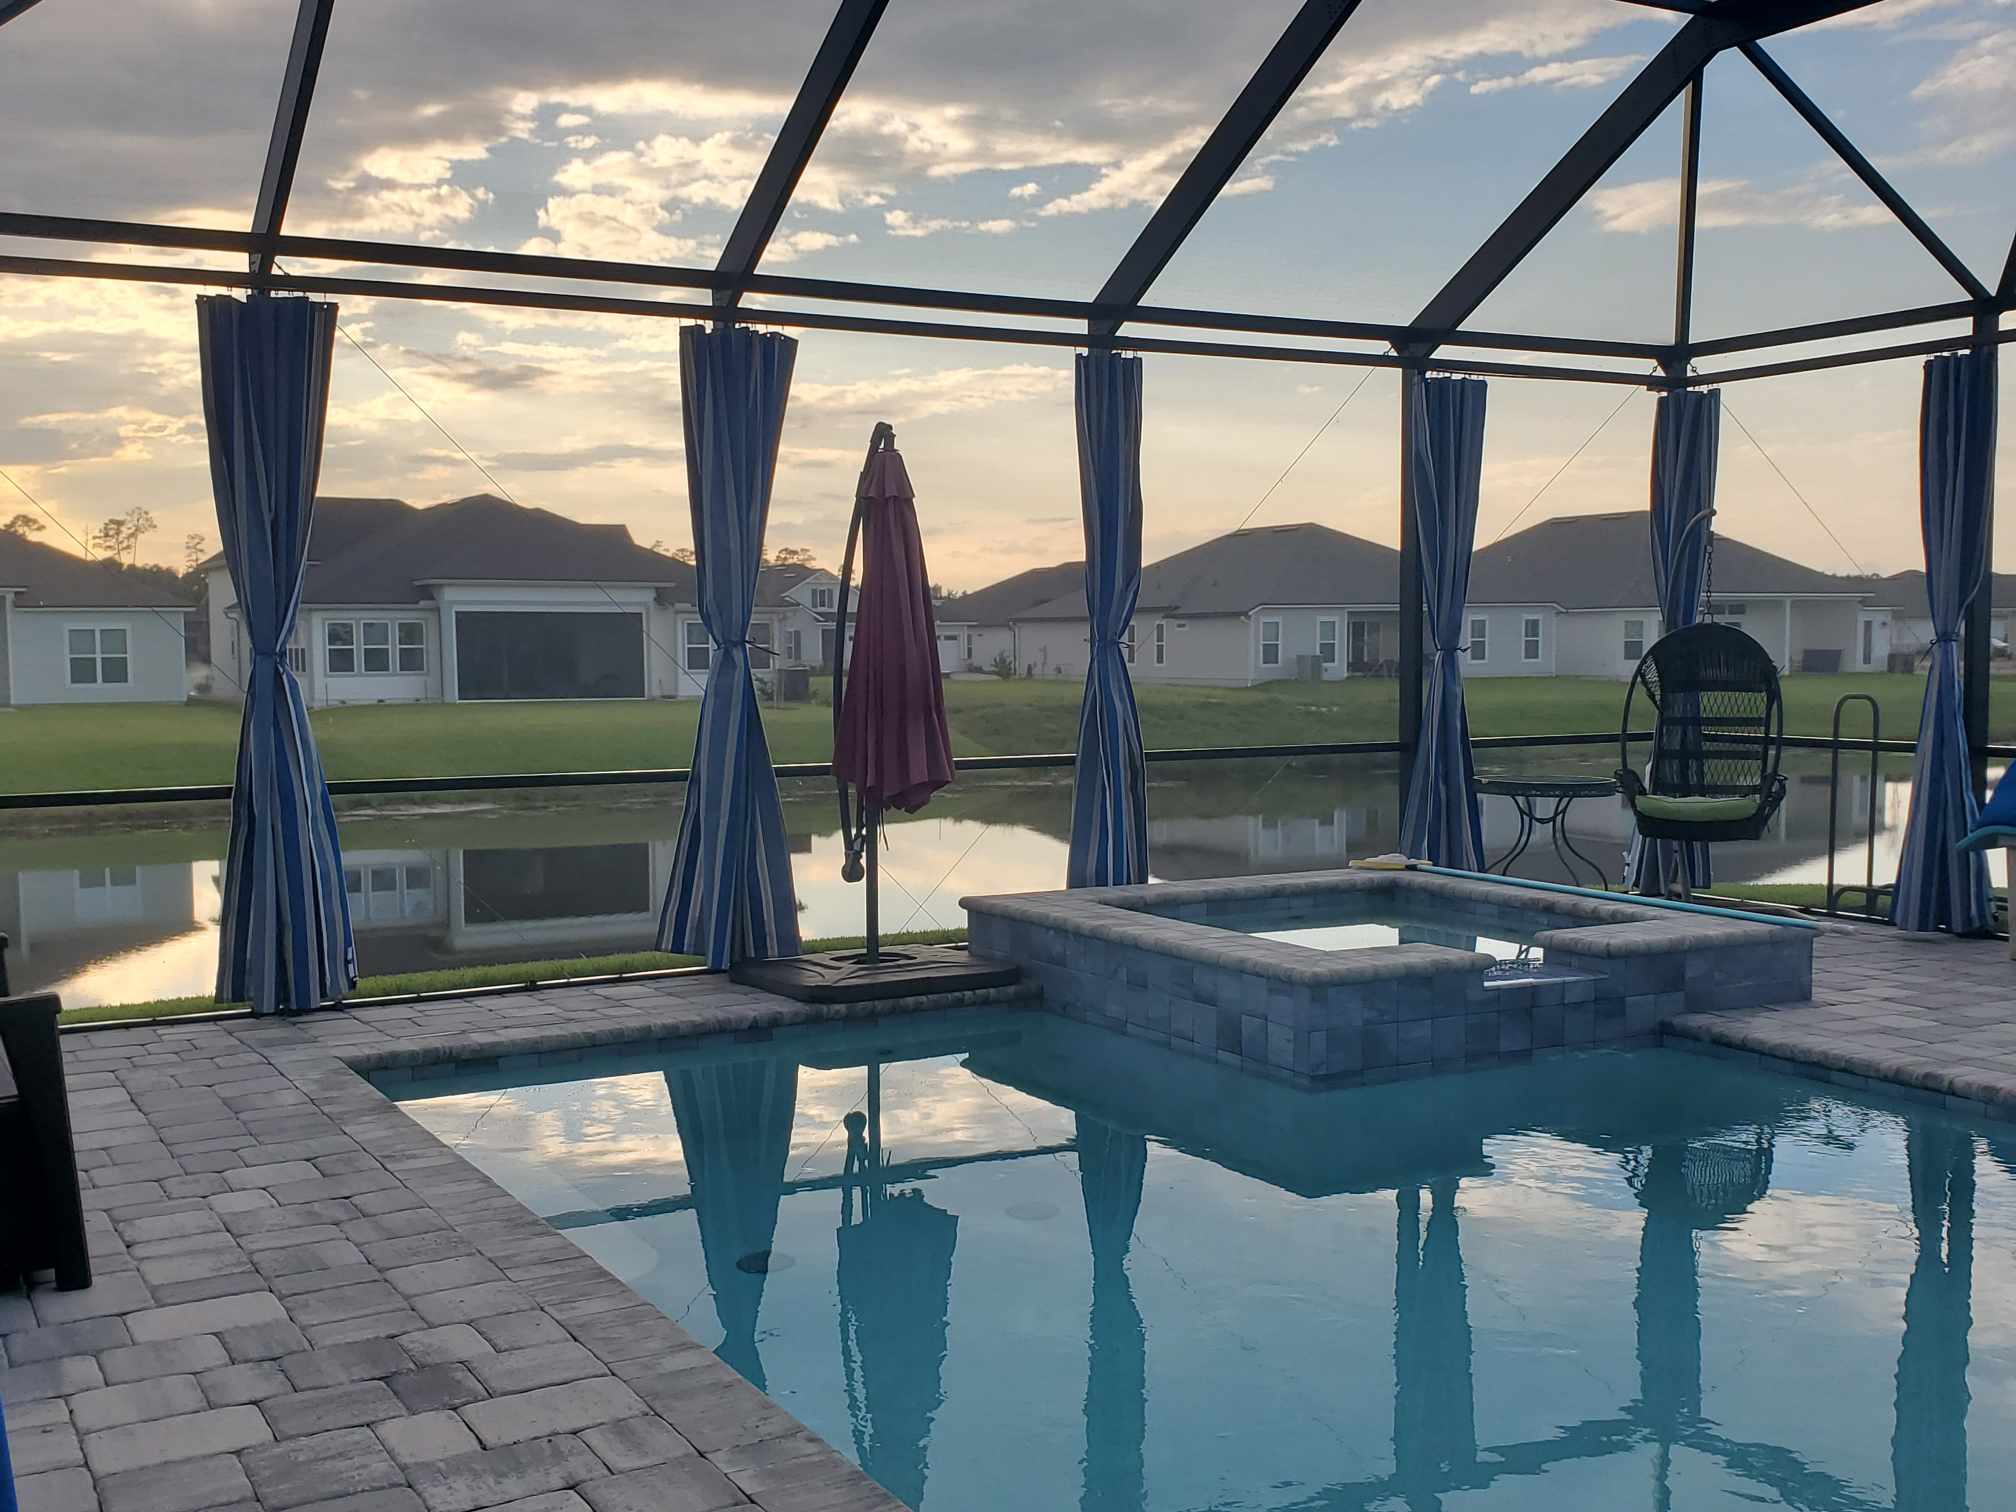 These beautiful pool cage curtains are open so the homeowner can take in the beautiful Jacksonville, Florida sunset.